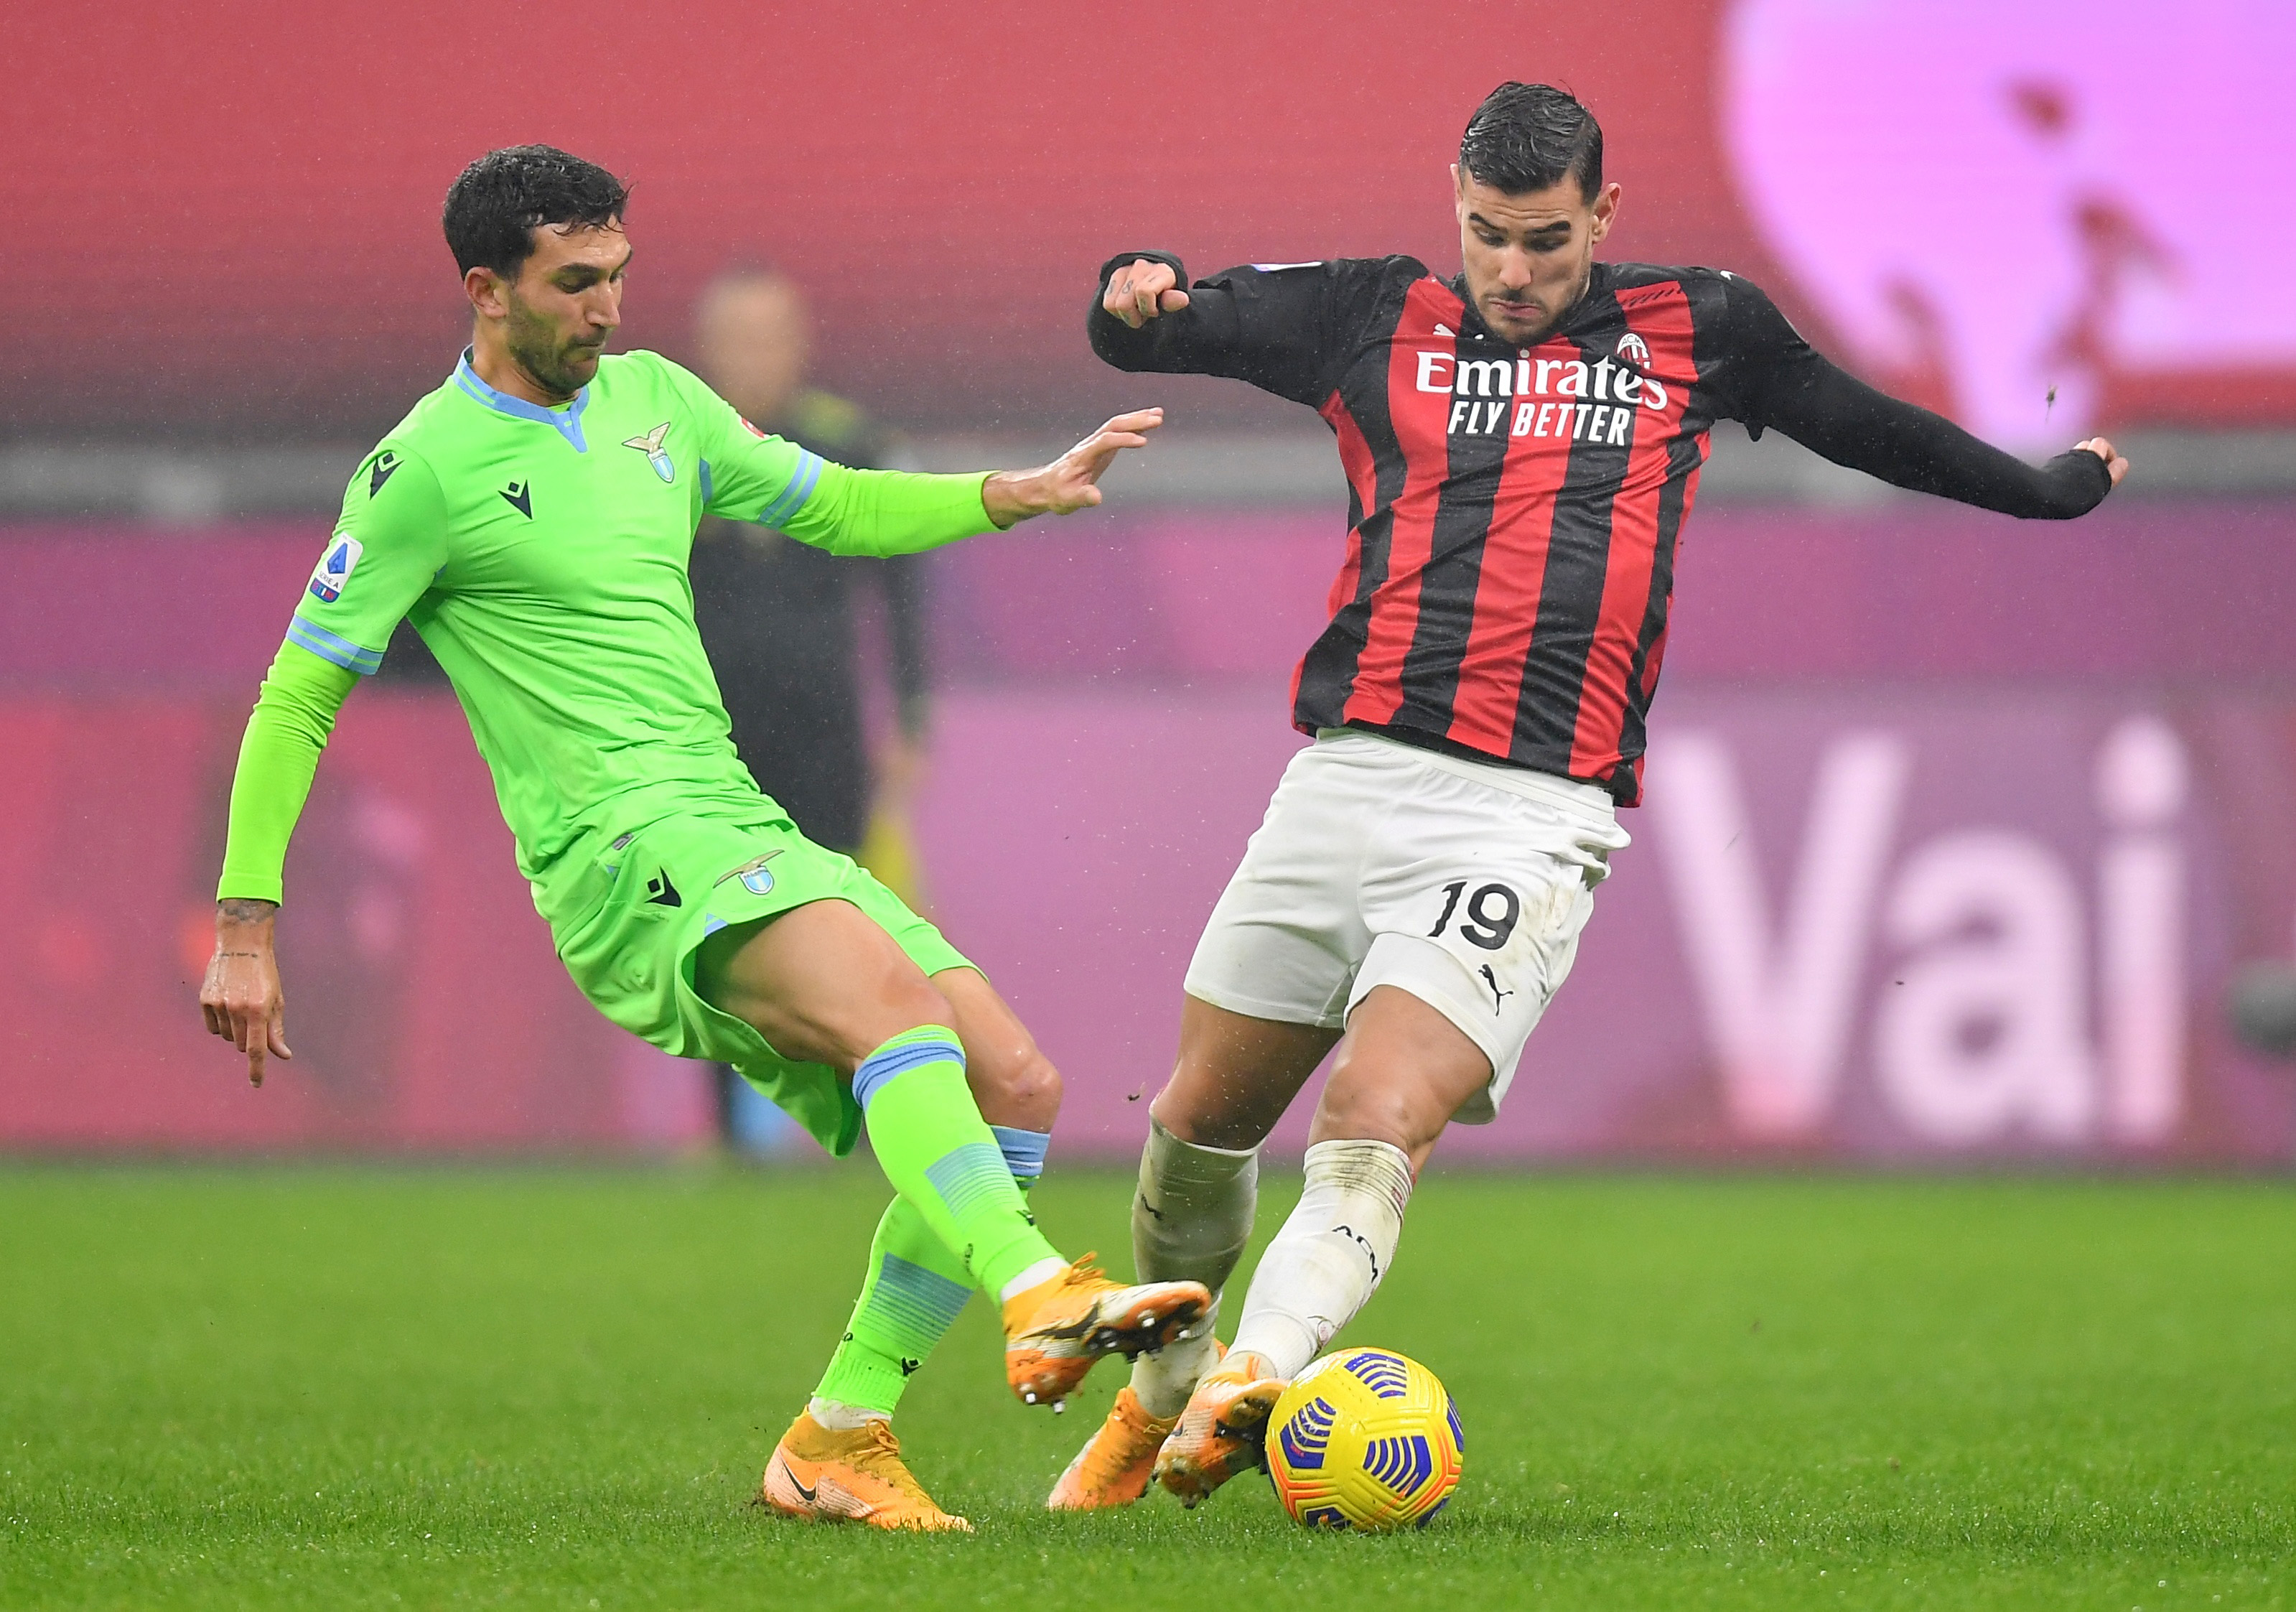 Milan snatch stoppage time winner to stay top of Serie A